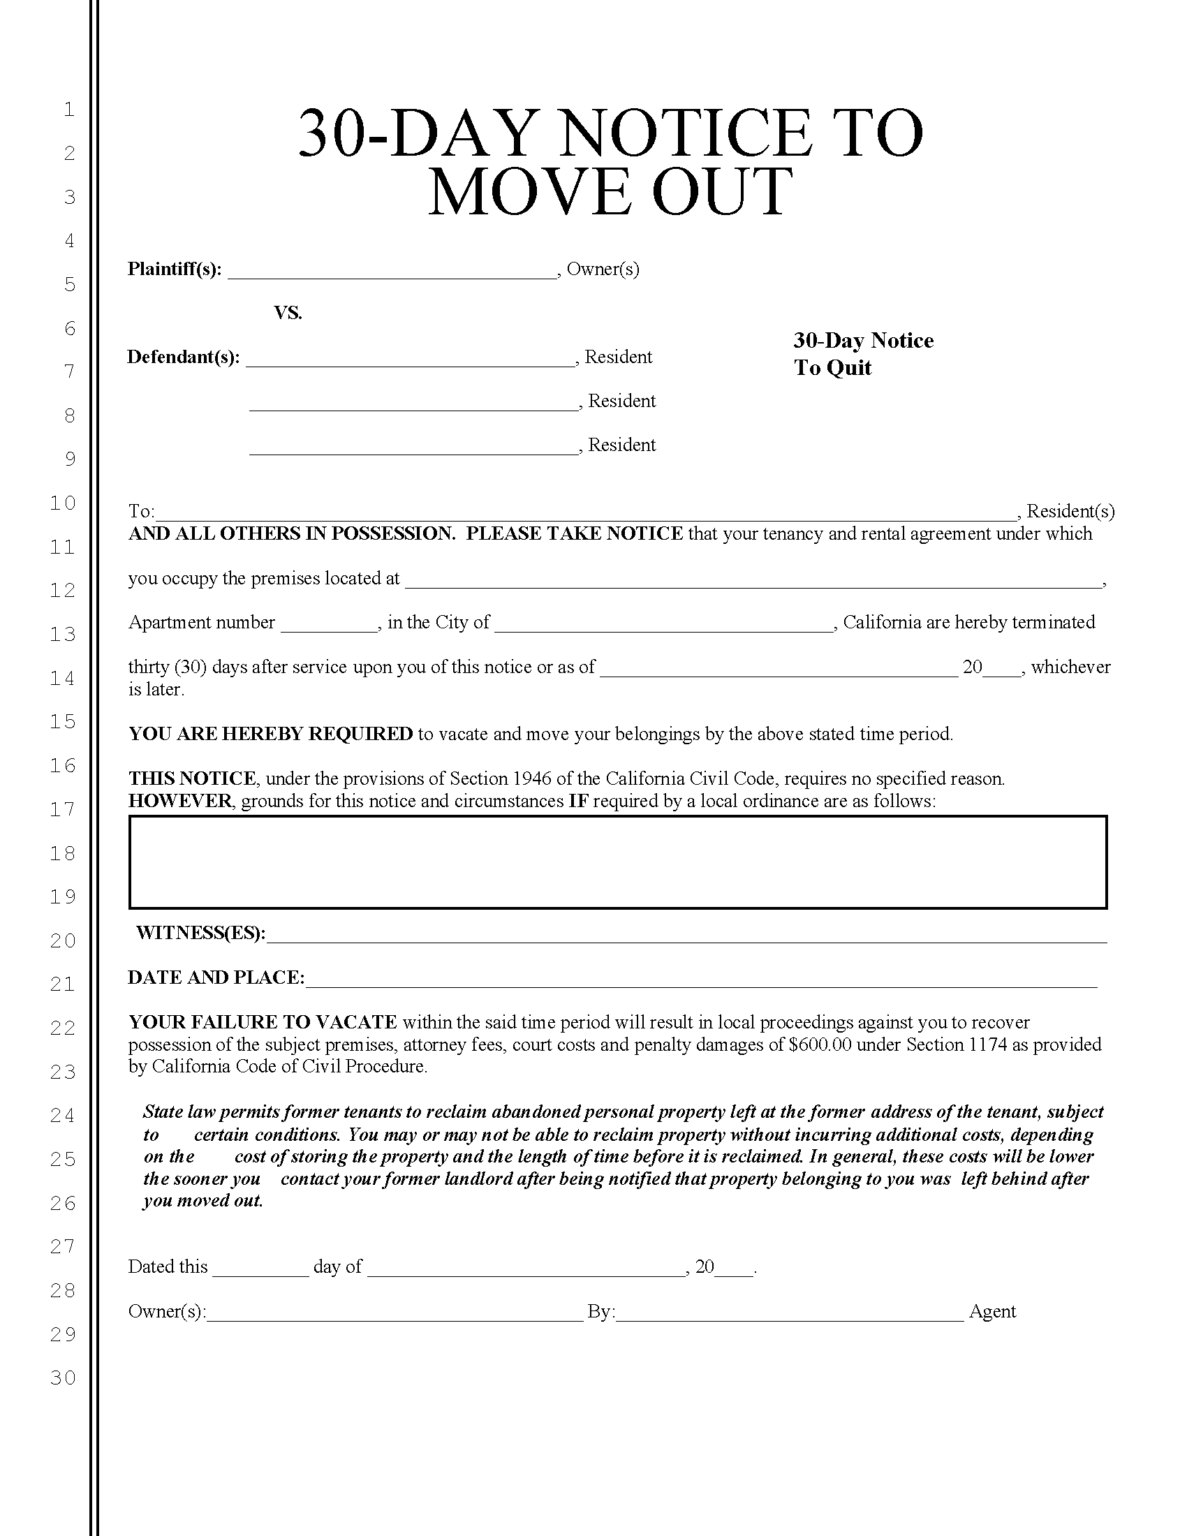 Free California 30Day Notice to Quit Lease Termination (Under 1 Year